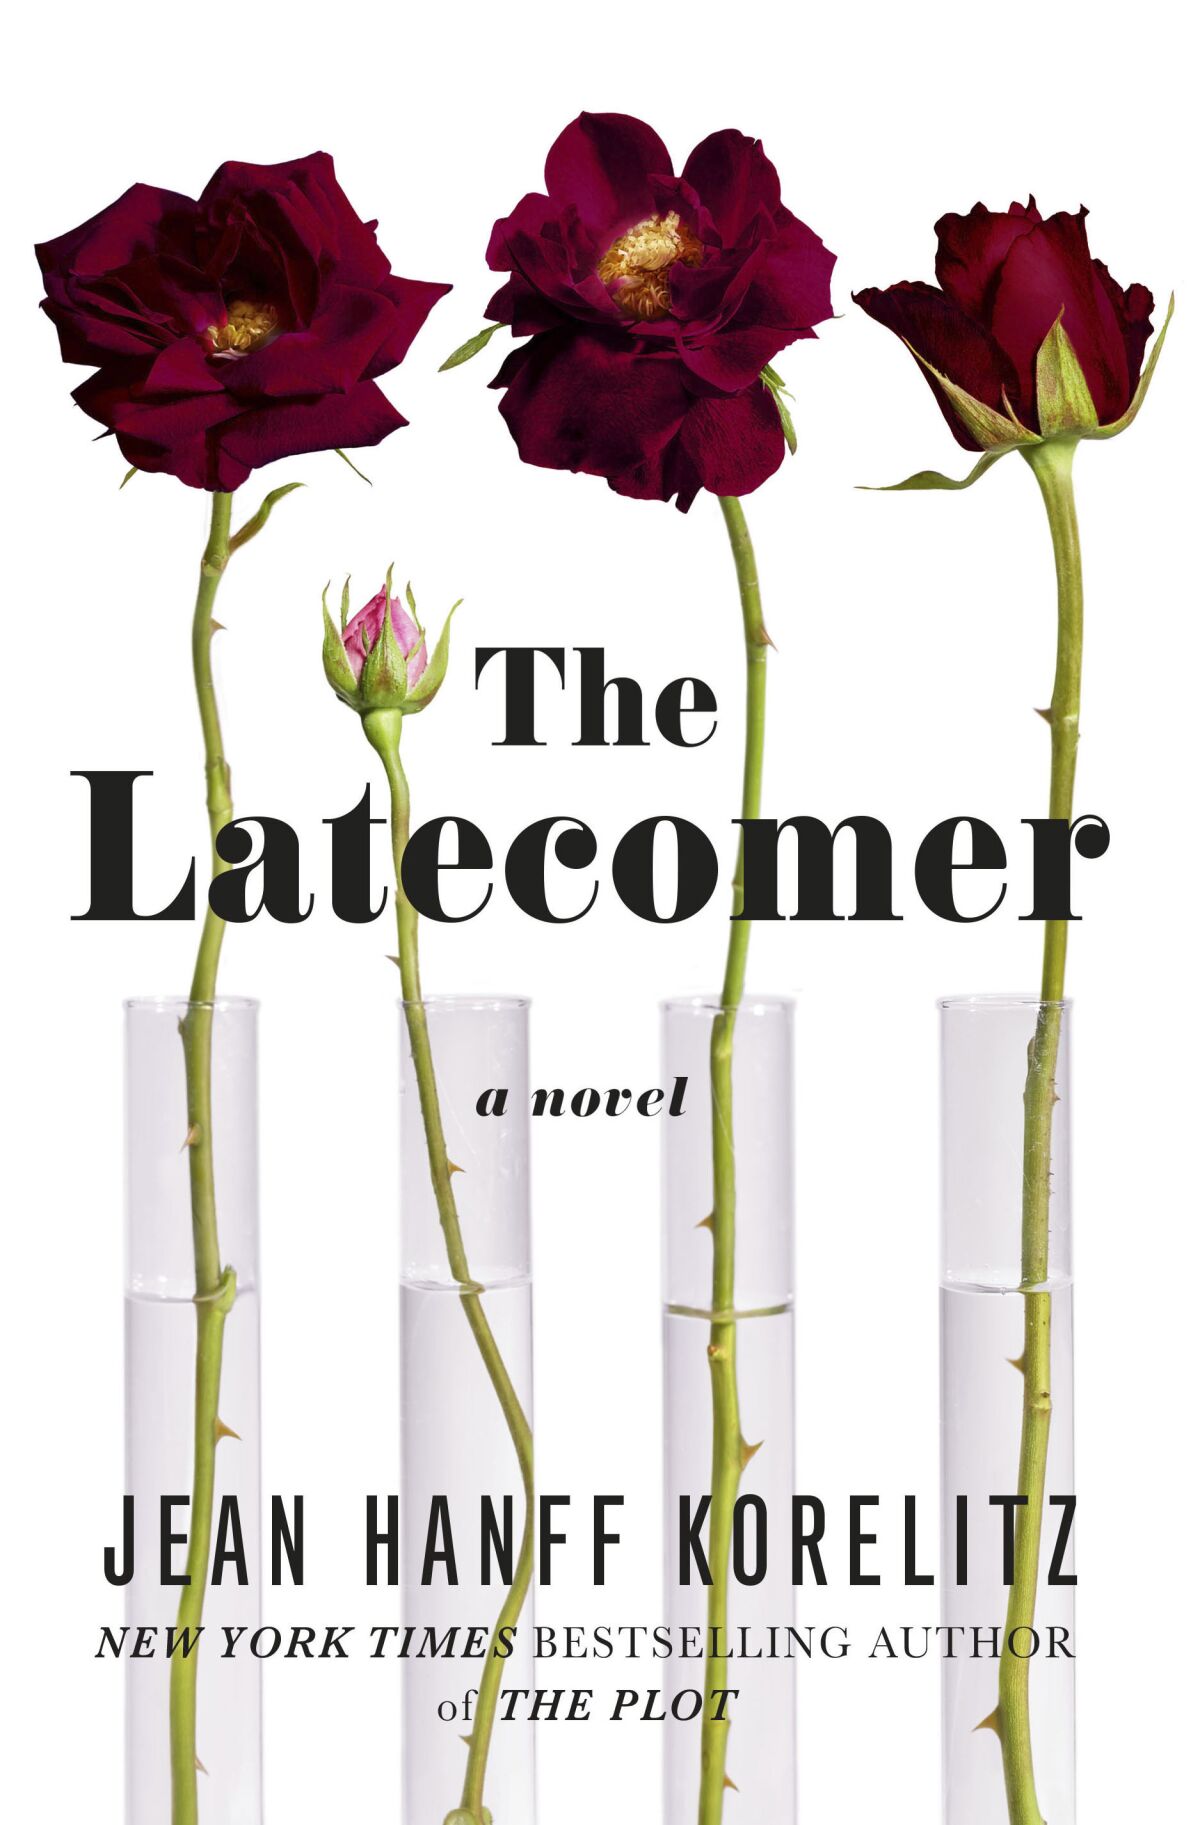 This cover image released by Celedon Books shows "The Latecomer," a novel by Jean Hanff Korelitz. (Celedon Books via AP)